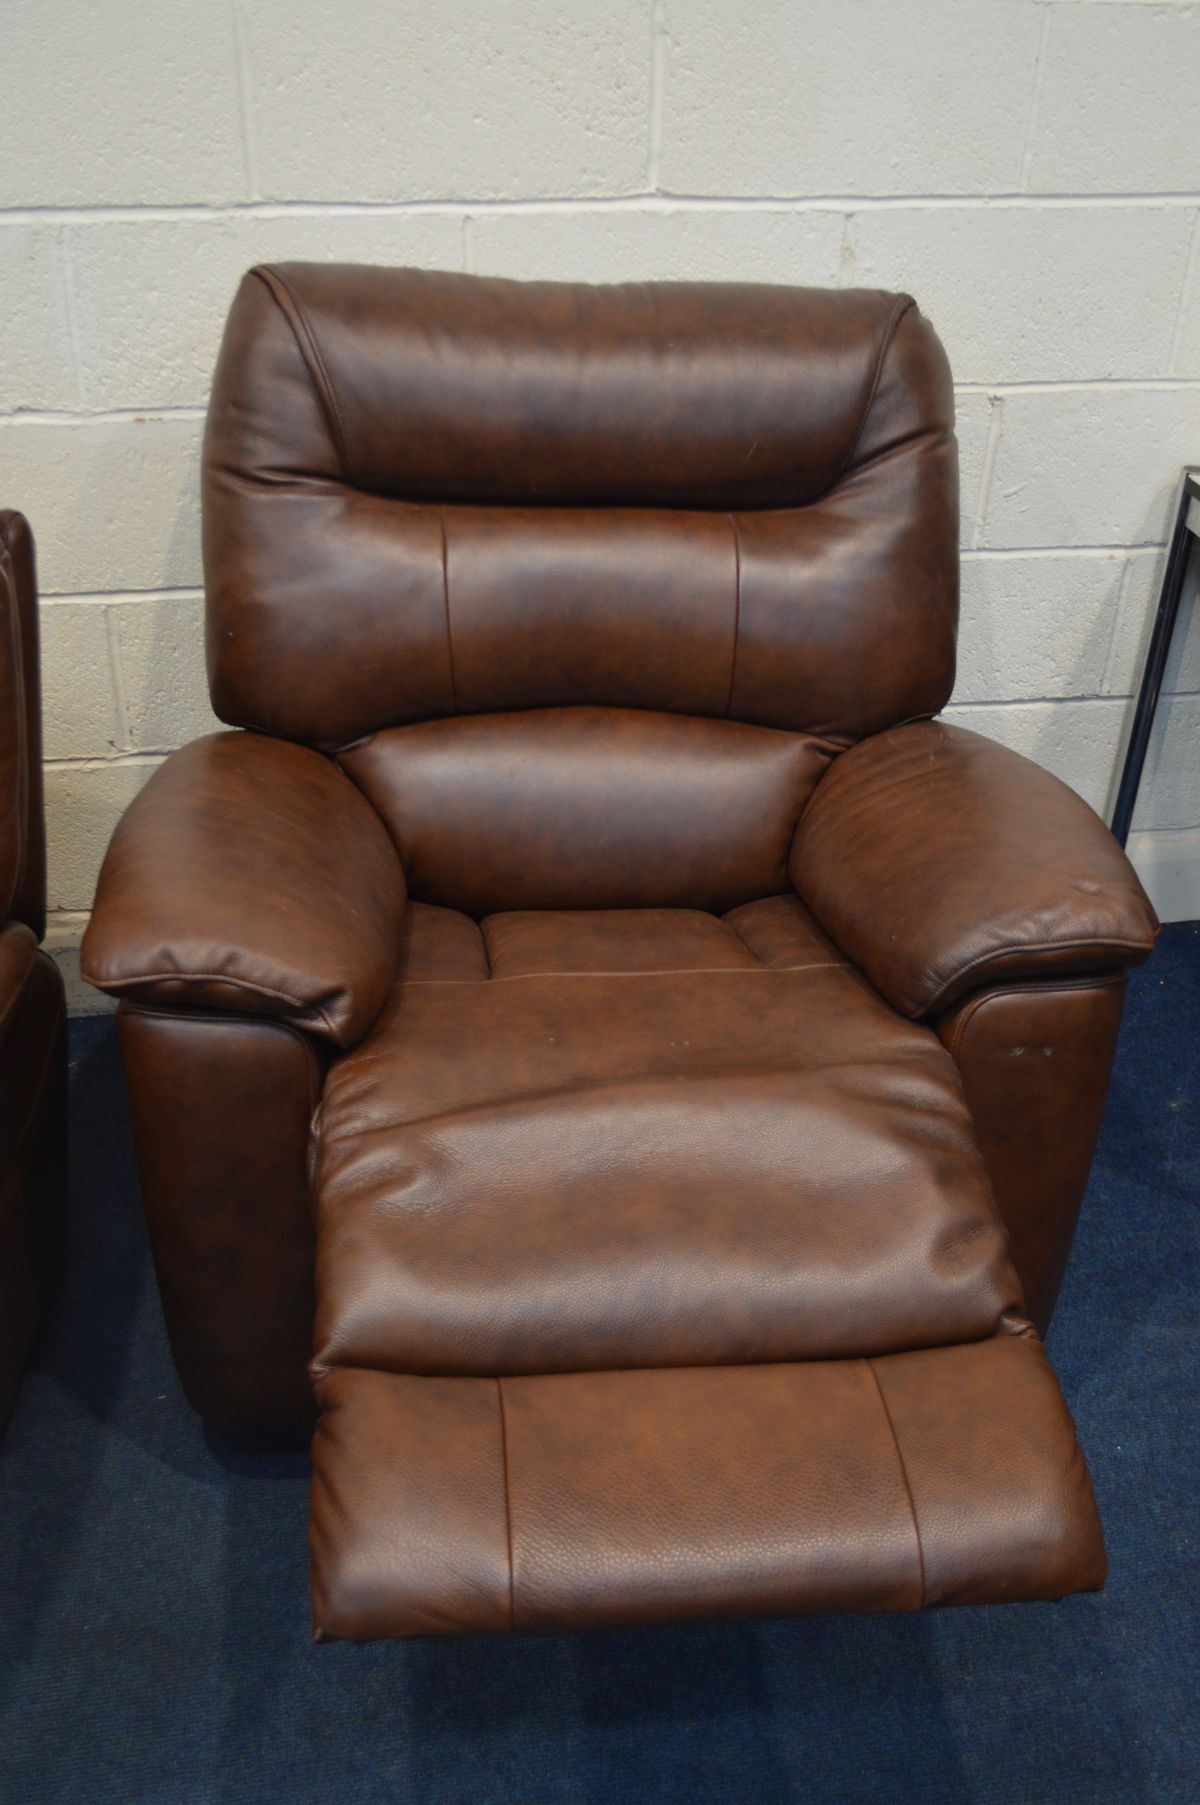 A LA-Z- BOY BROWN LEATHER CORNER SOFA, with electric recliners to each ends, length 250cm x depth - Image 6 of 6